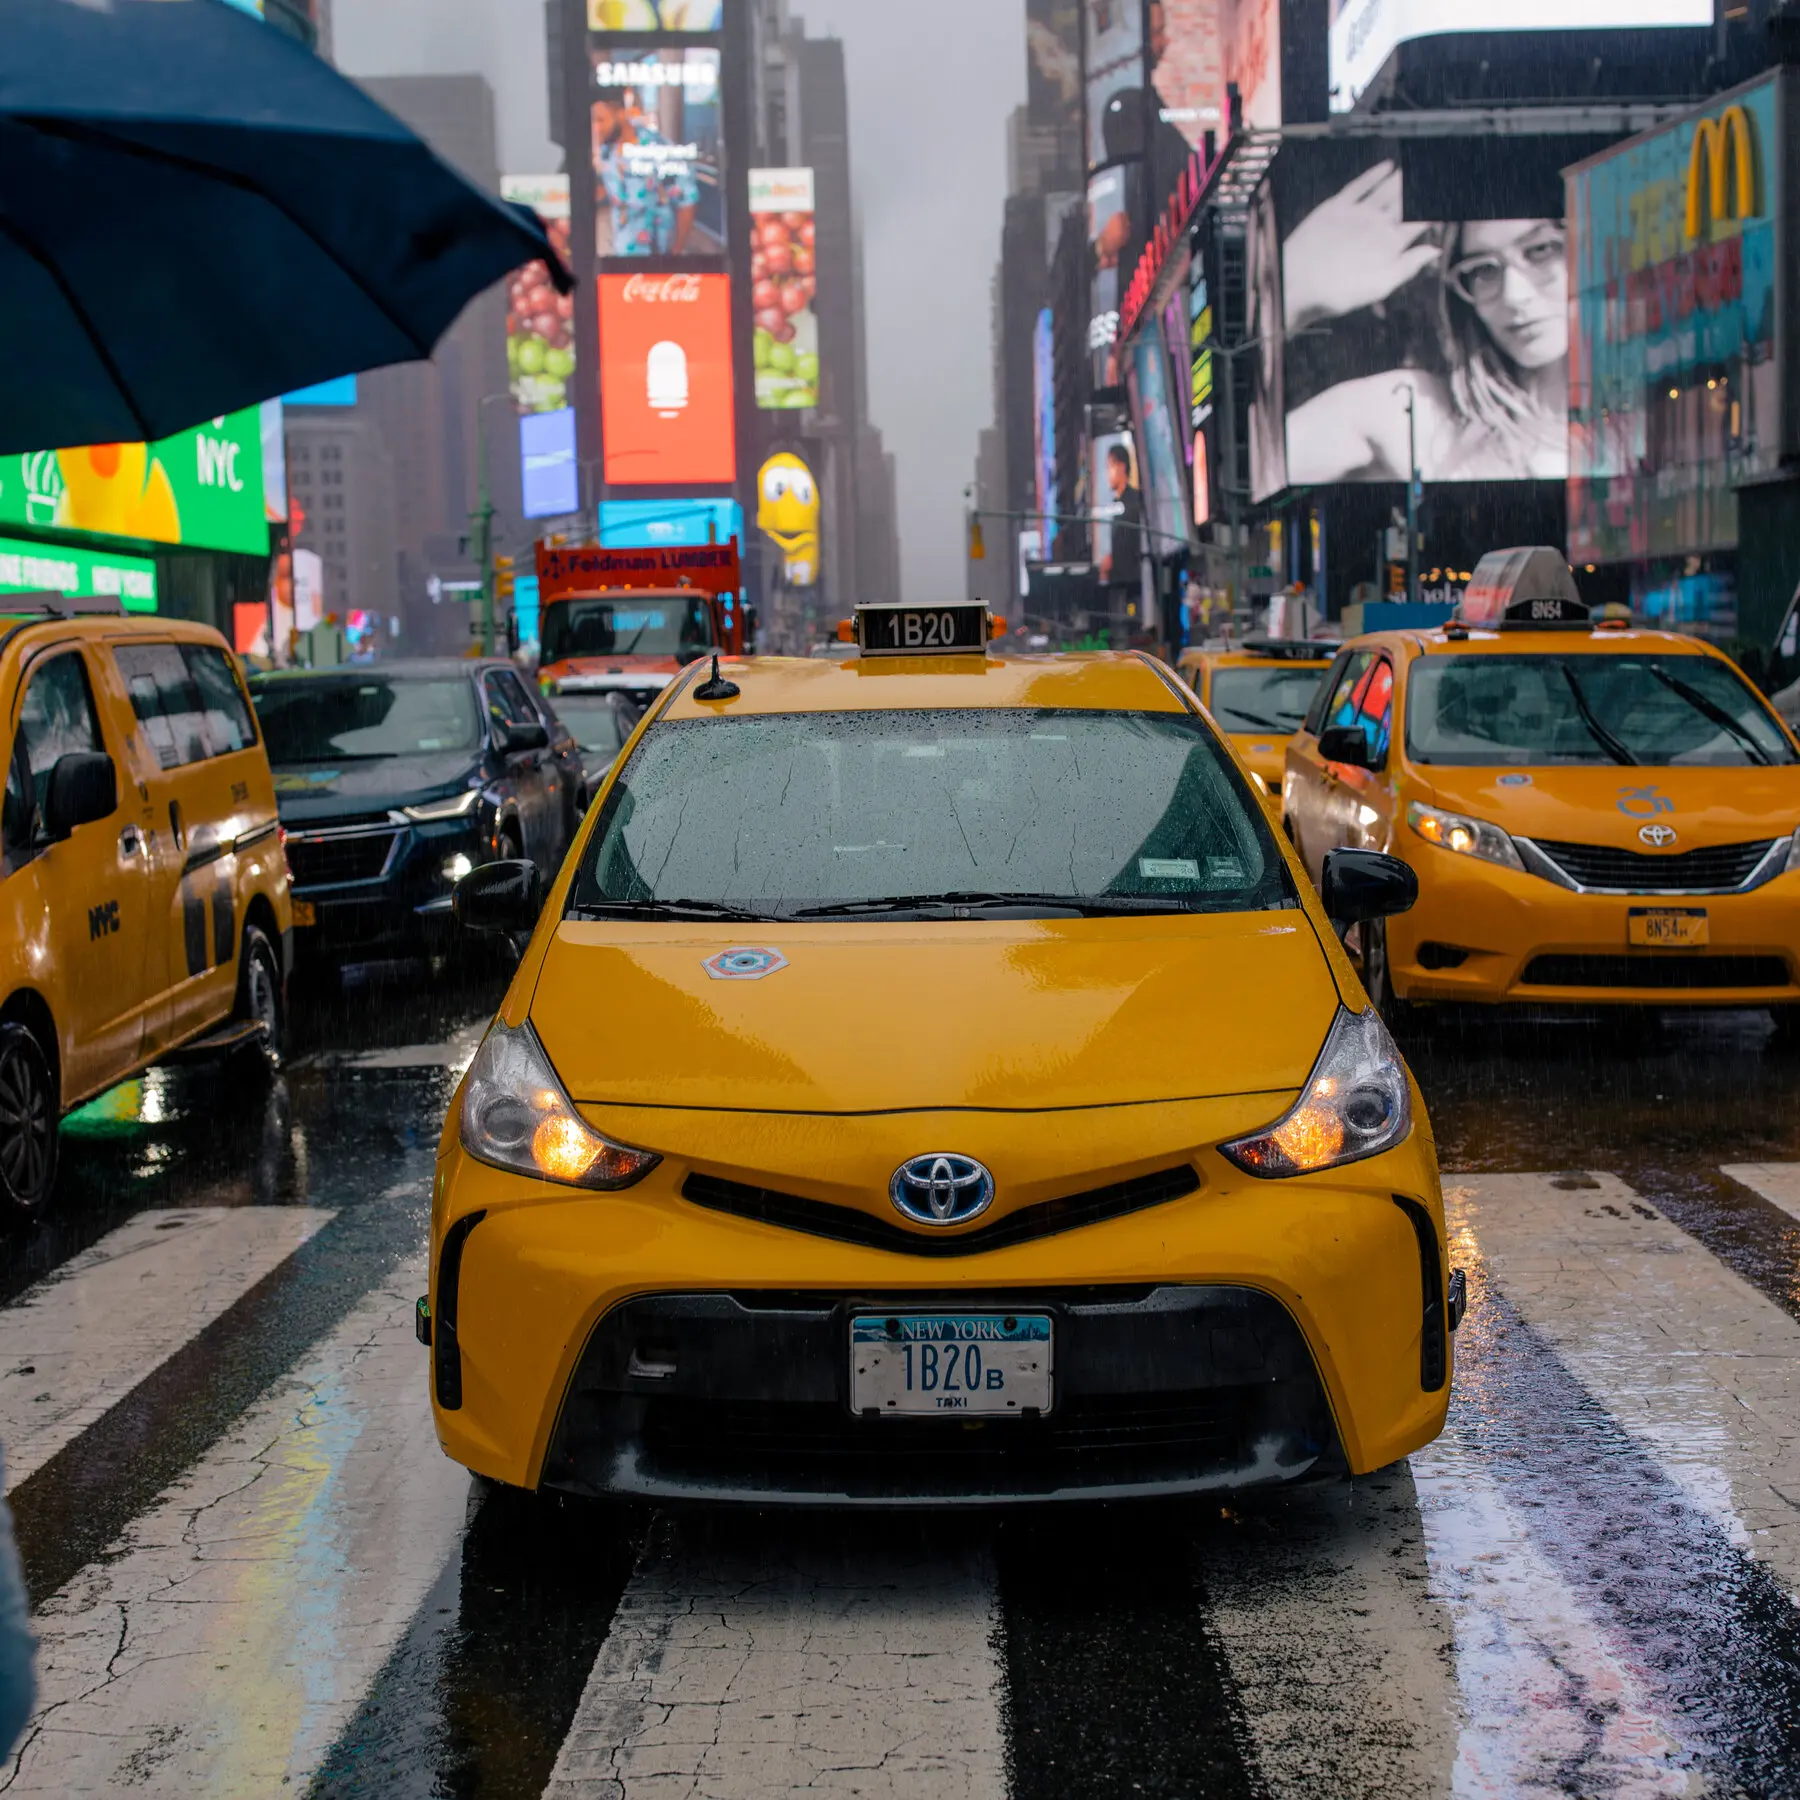 how much is a taxi in nyc - How much does it cost to ride in a taxi in NYC